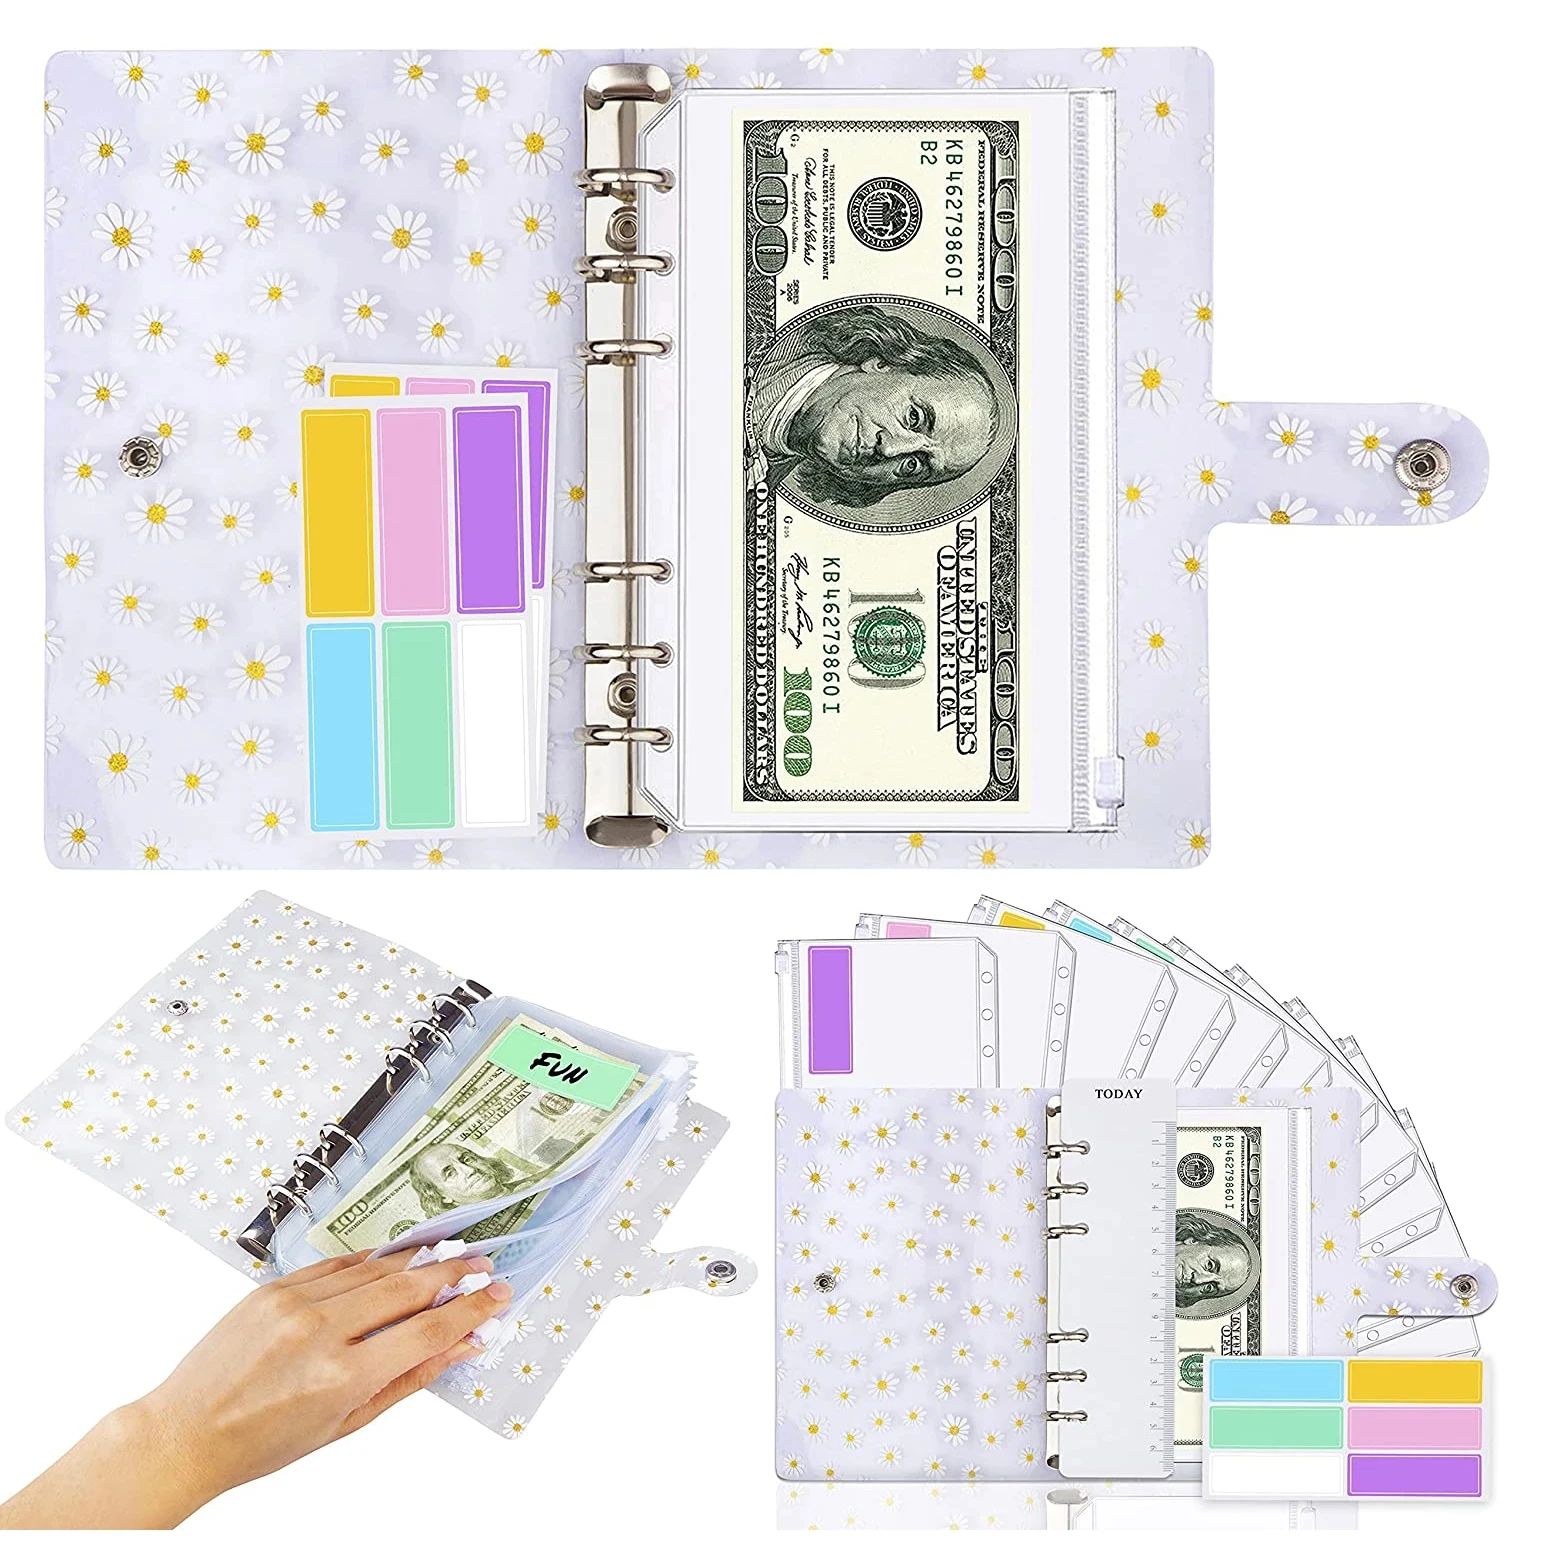 

15 Pieces A6 Daisy PVC Binder Cover Budget Planner and 12 Clear Binder Pockets Organizer,Colored Labels for Budgeting